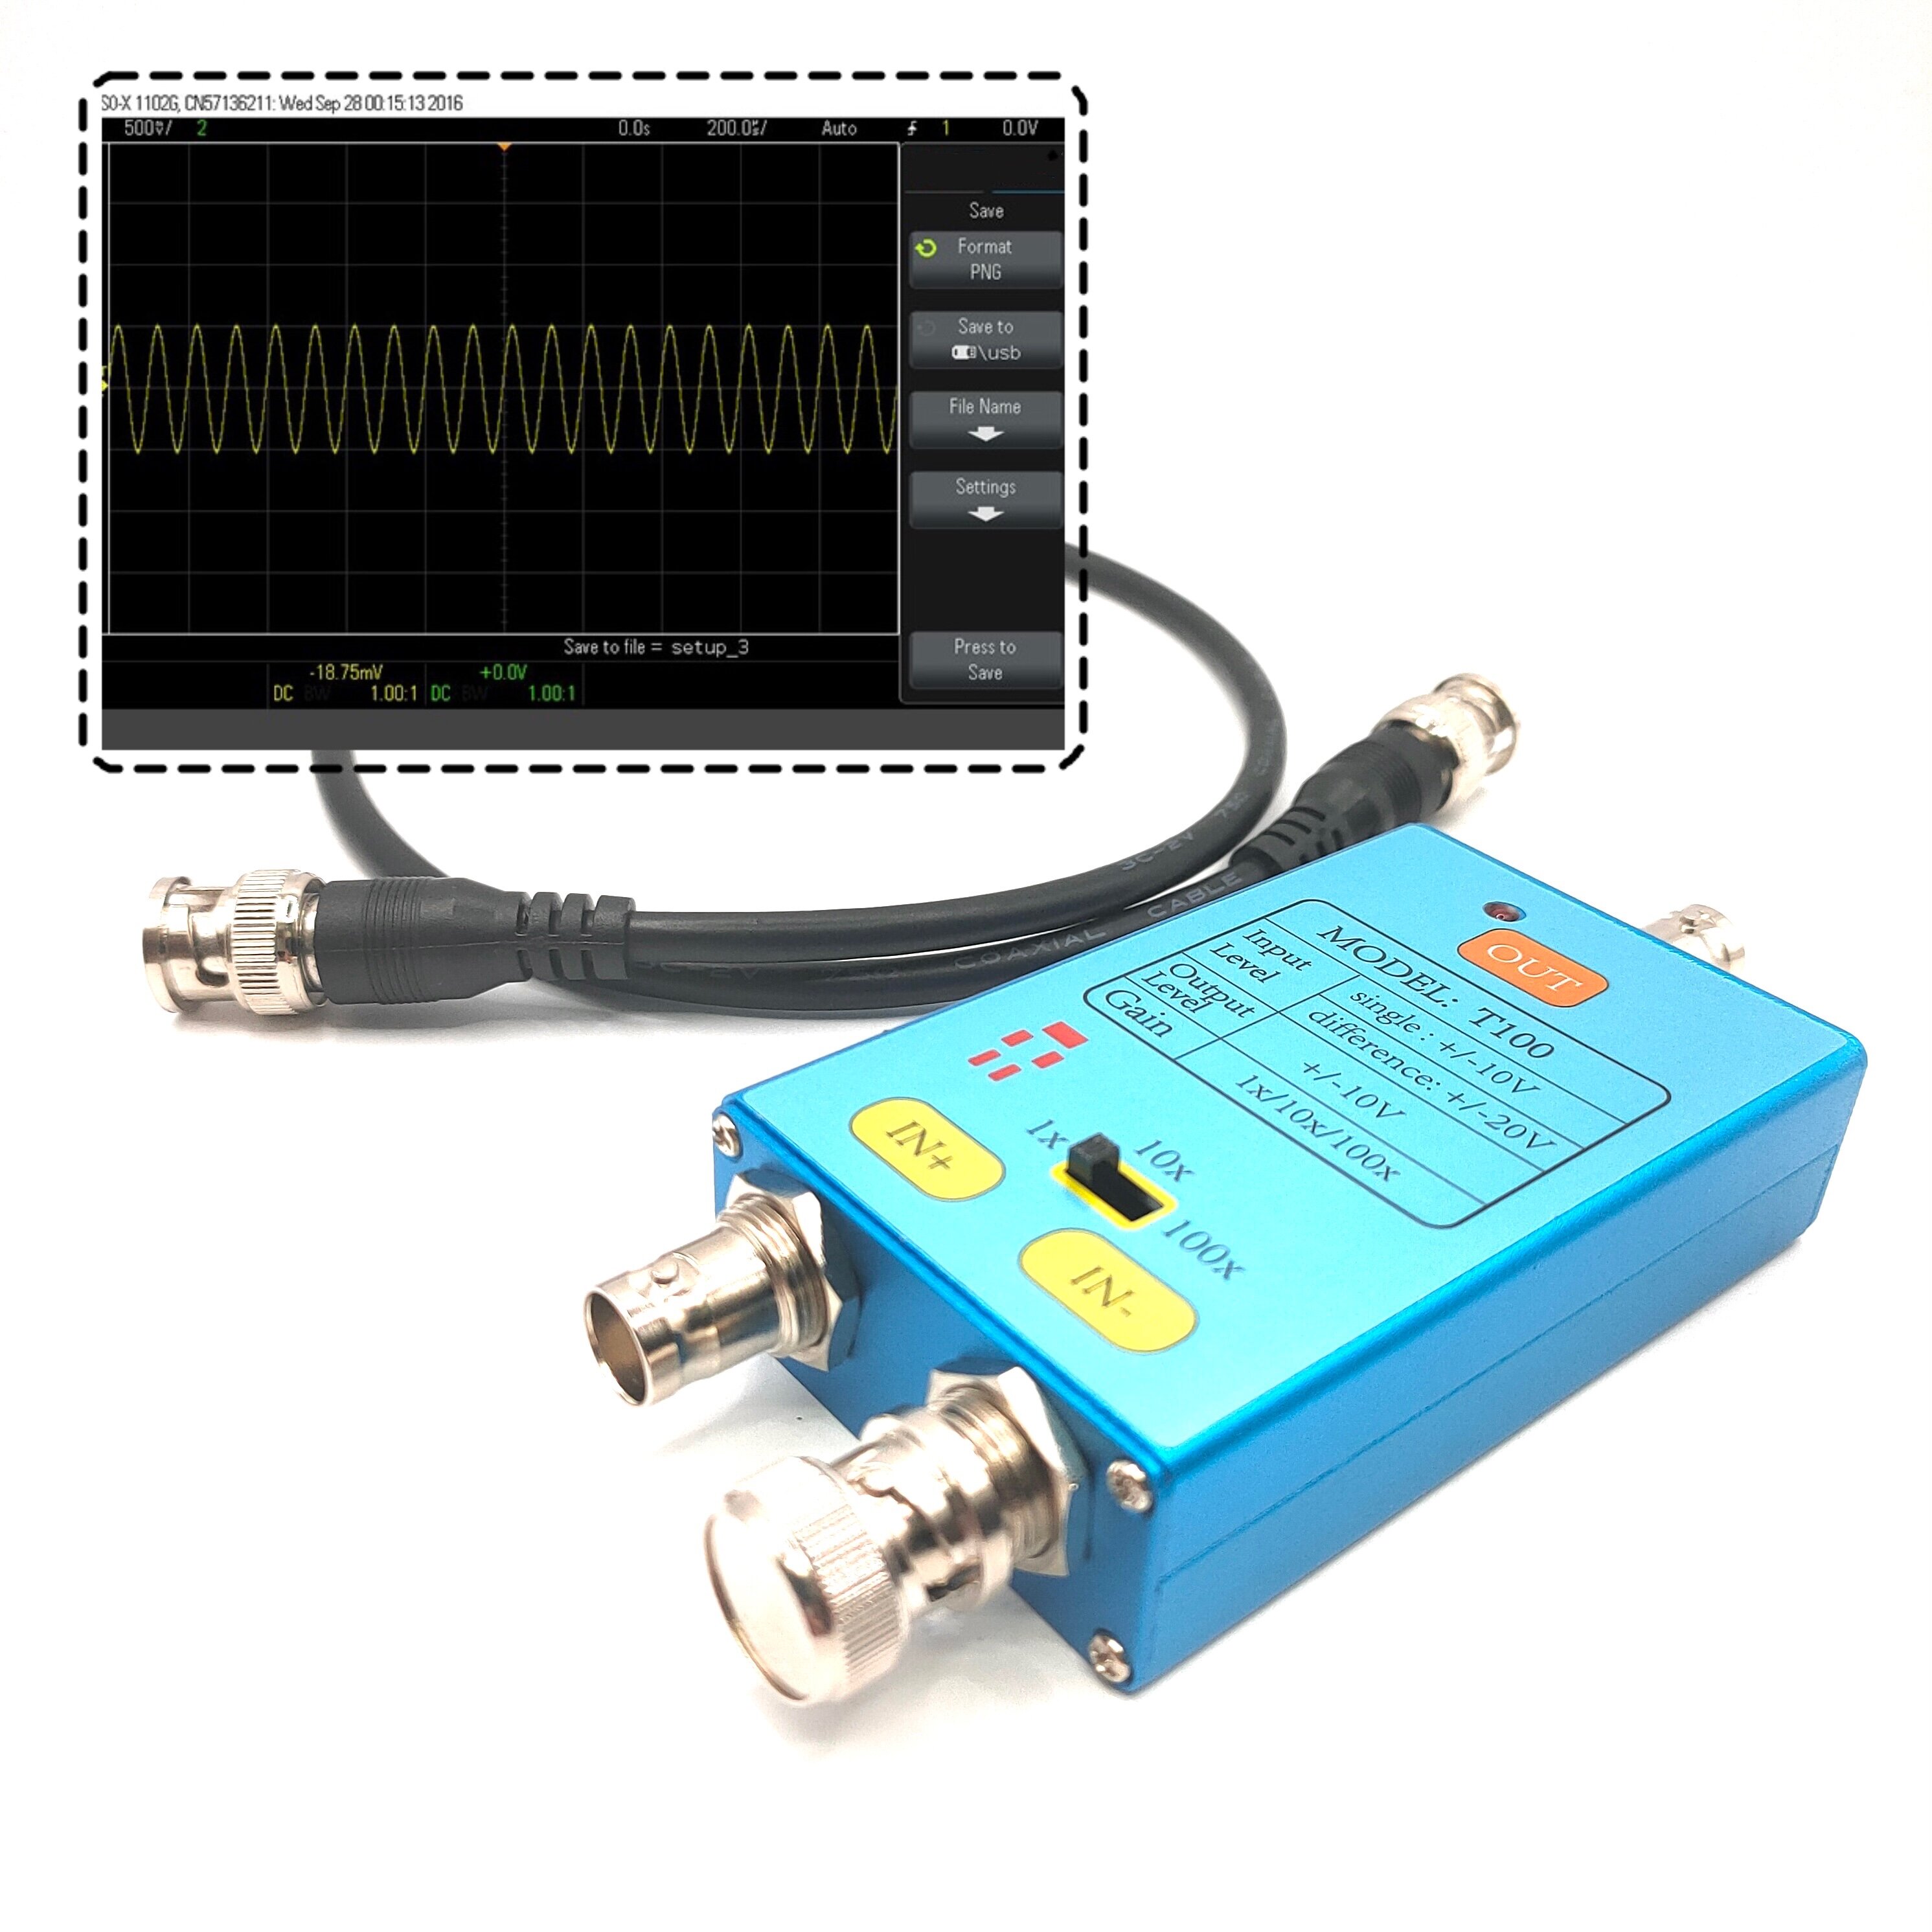 10M Bandwidth Oscilloscope Differential Probe Signal Amplifier for Weak Electrical Signal Measurement with Metal Shell